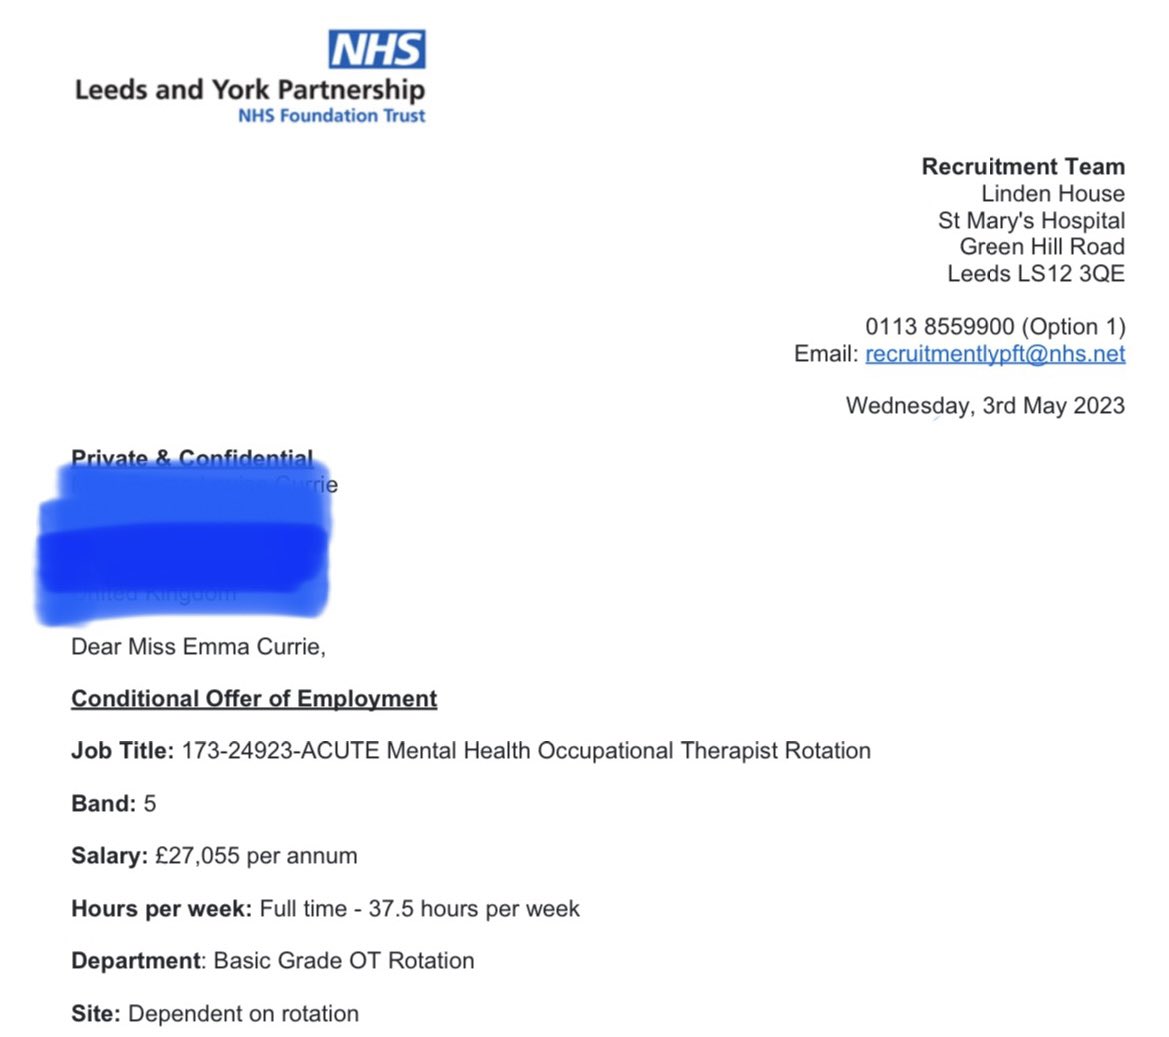 Exciting times ahead 🤩 only two more assignments to submit before becoming a qualified OT #studentOT #newlyqualified #mentalhealthOT